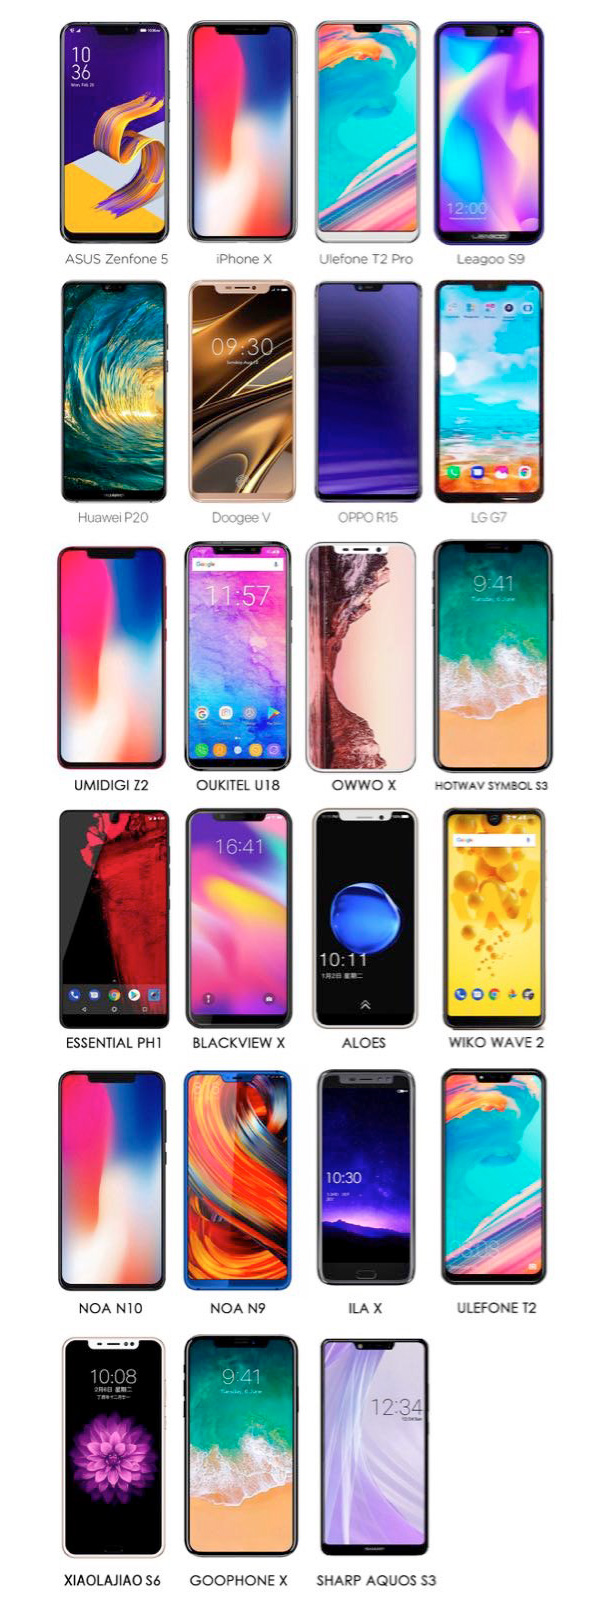 dien thoai android co tai tho giong iphone x